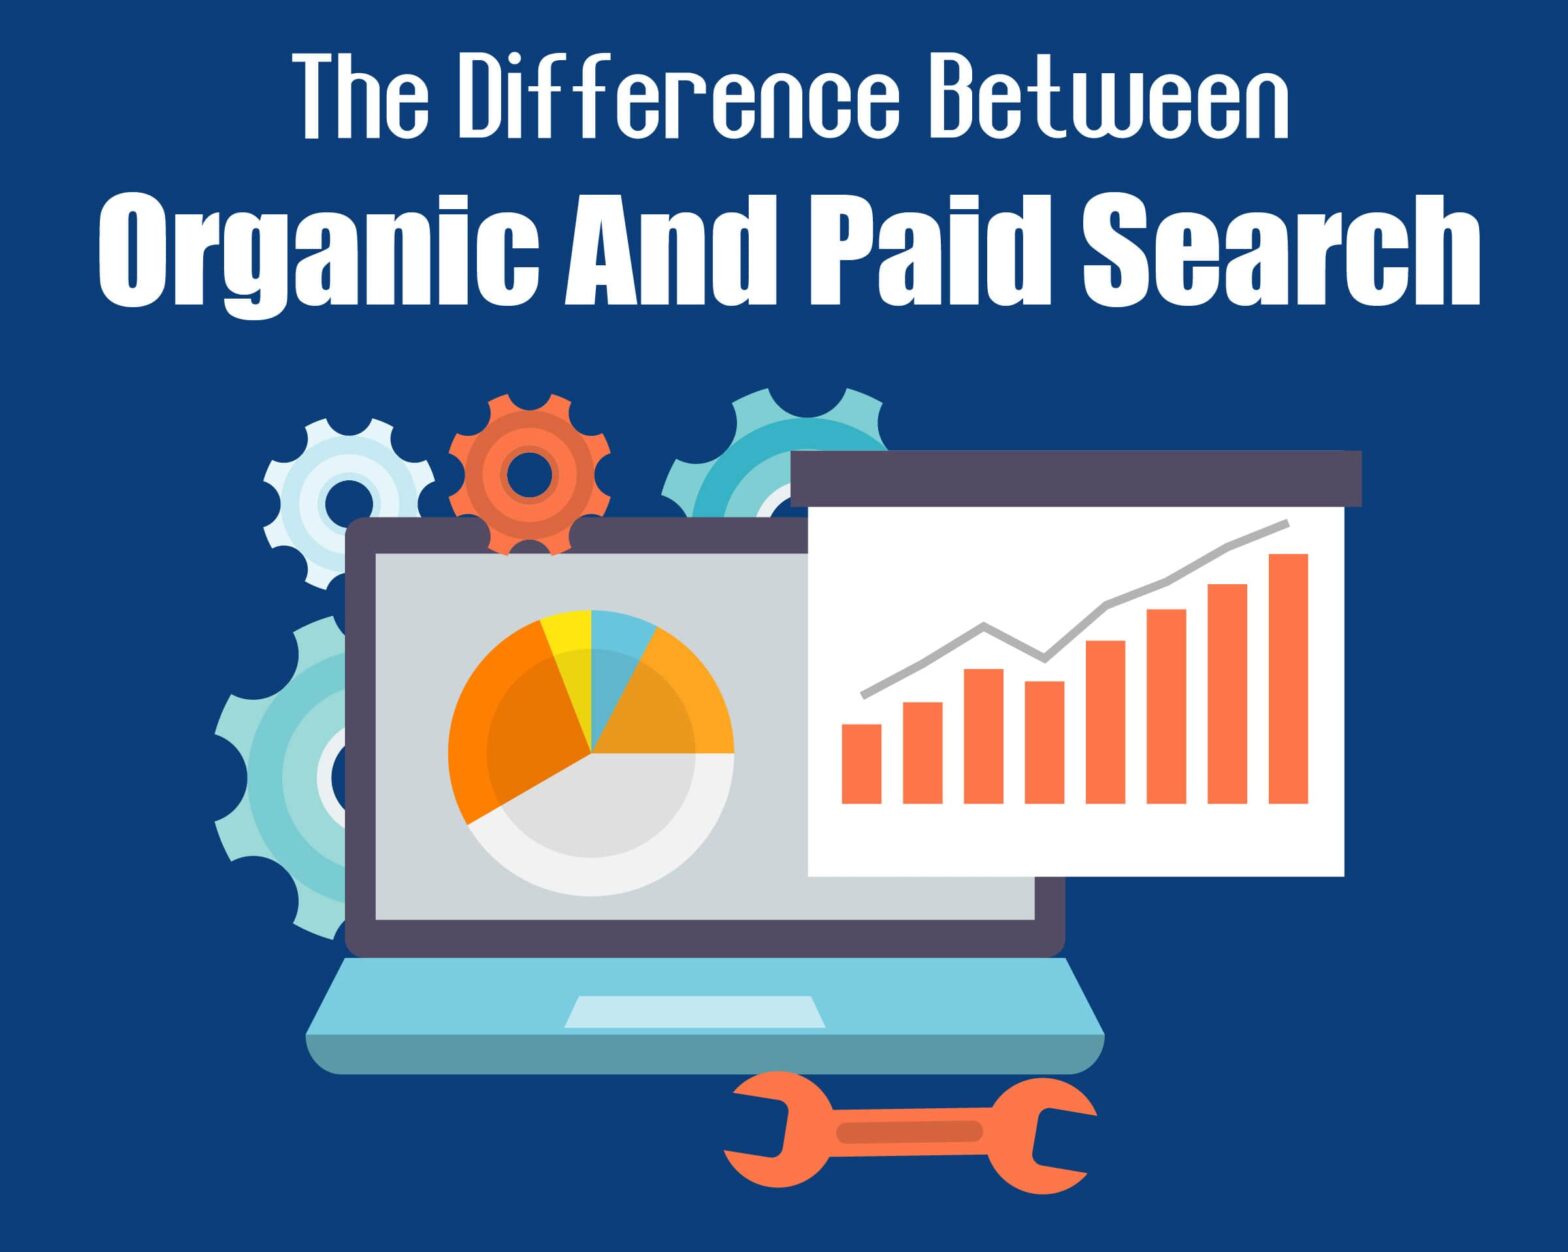 The Difference Between Organic and Paid Search